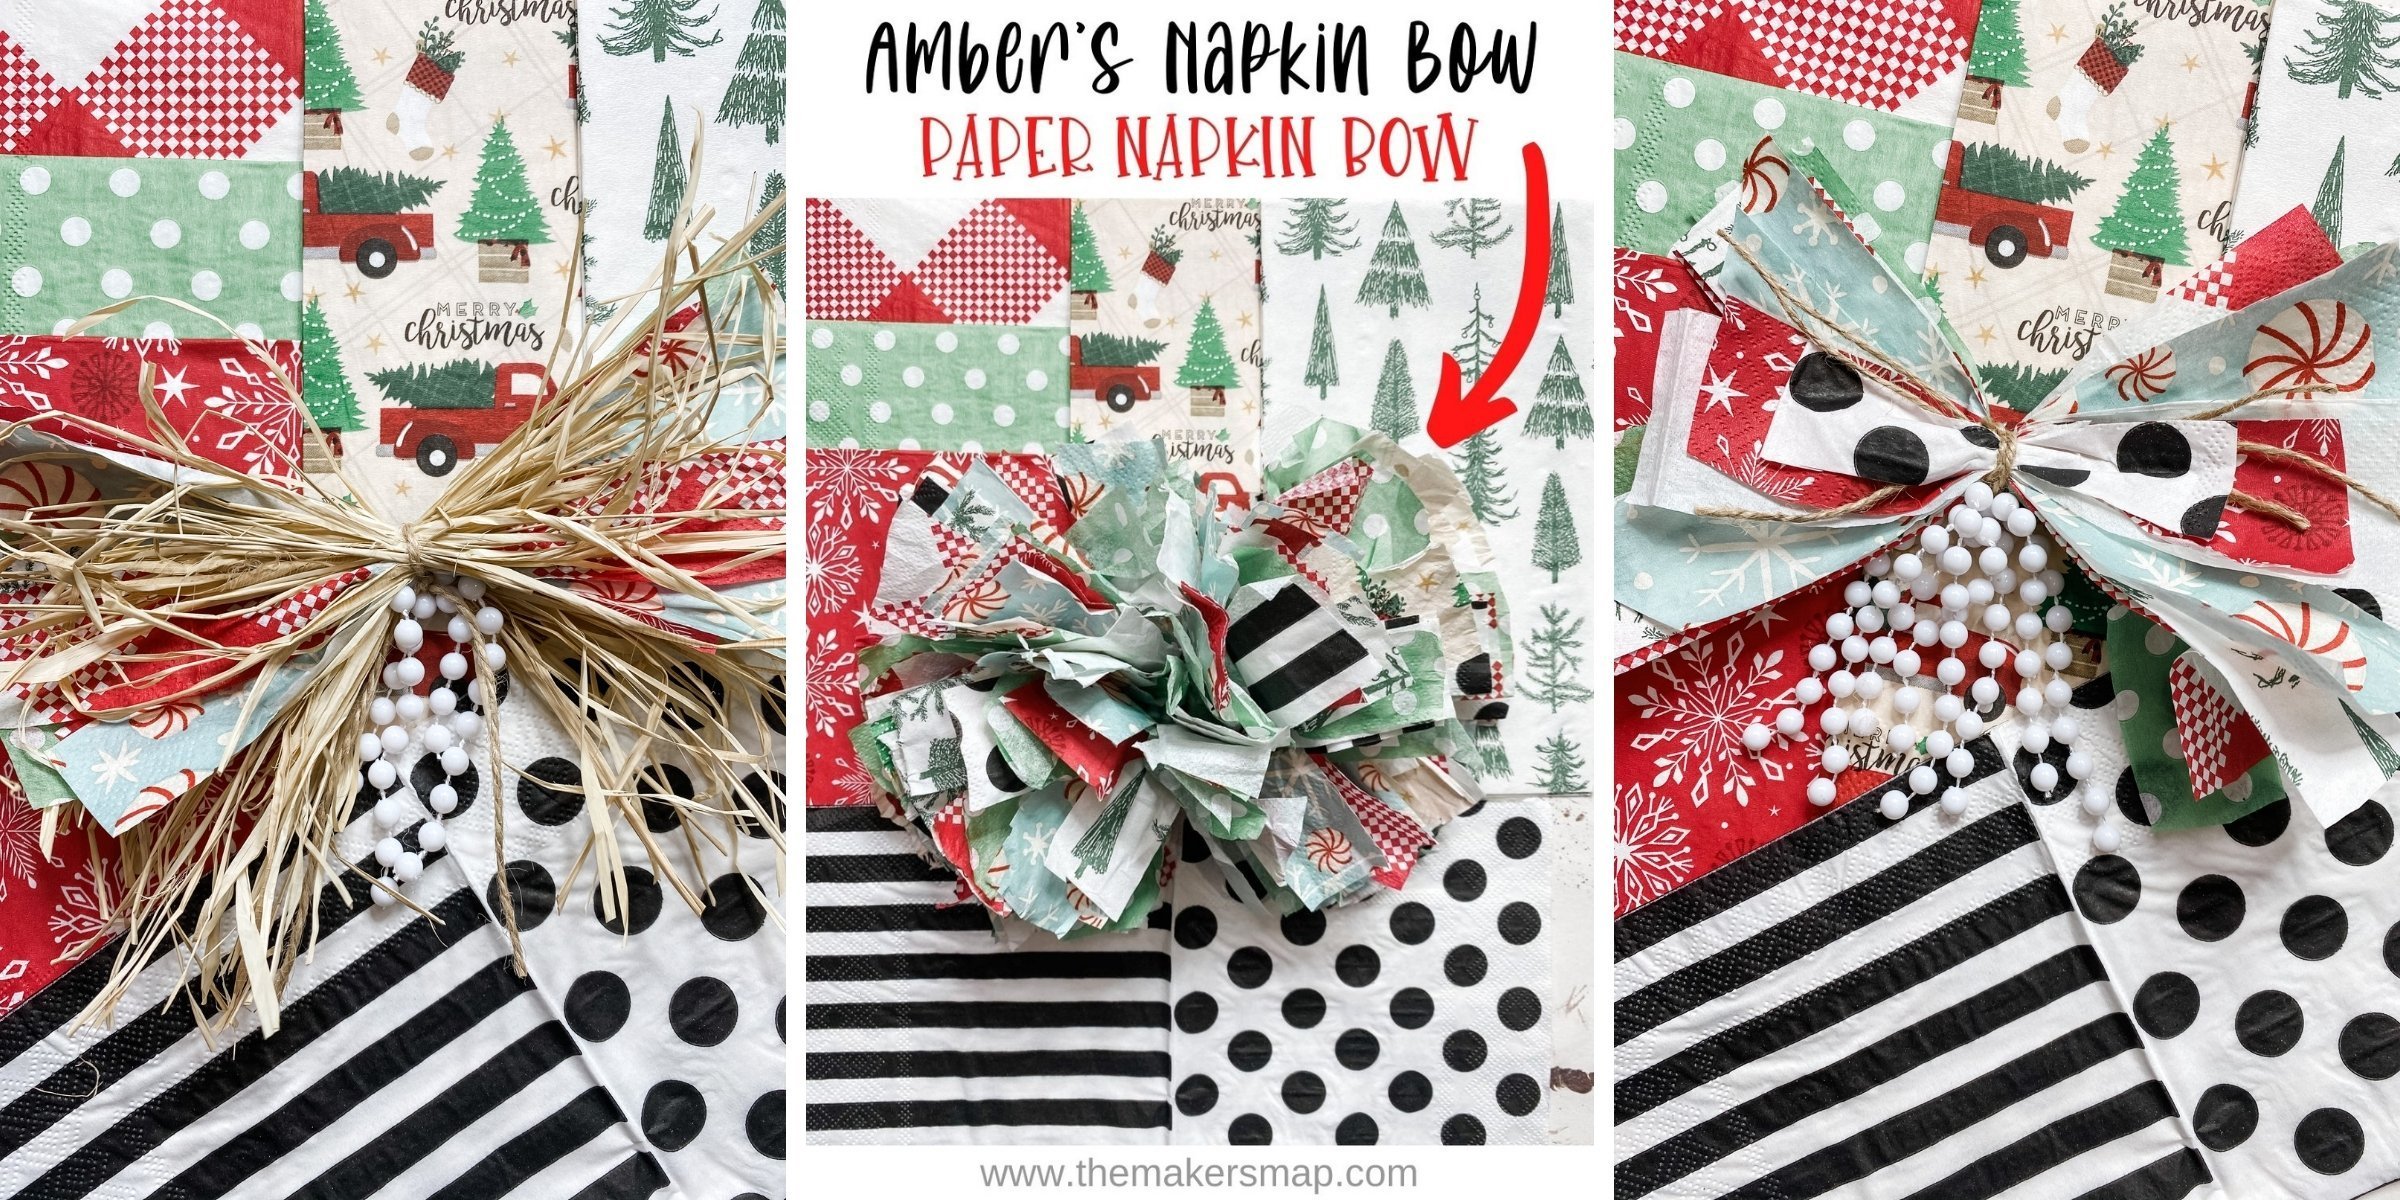 How to make Amber’s Napkin bow